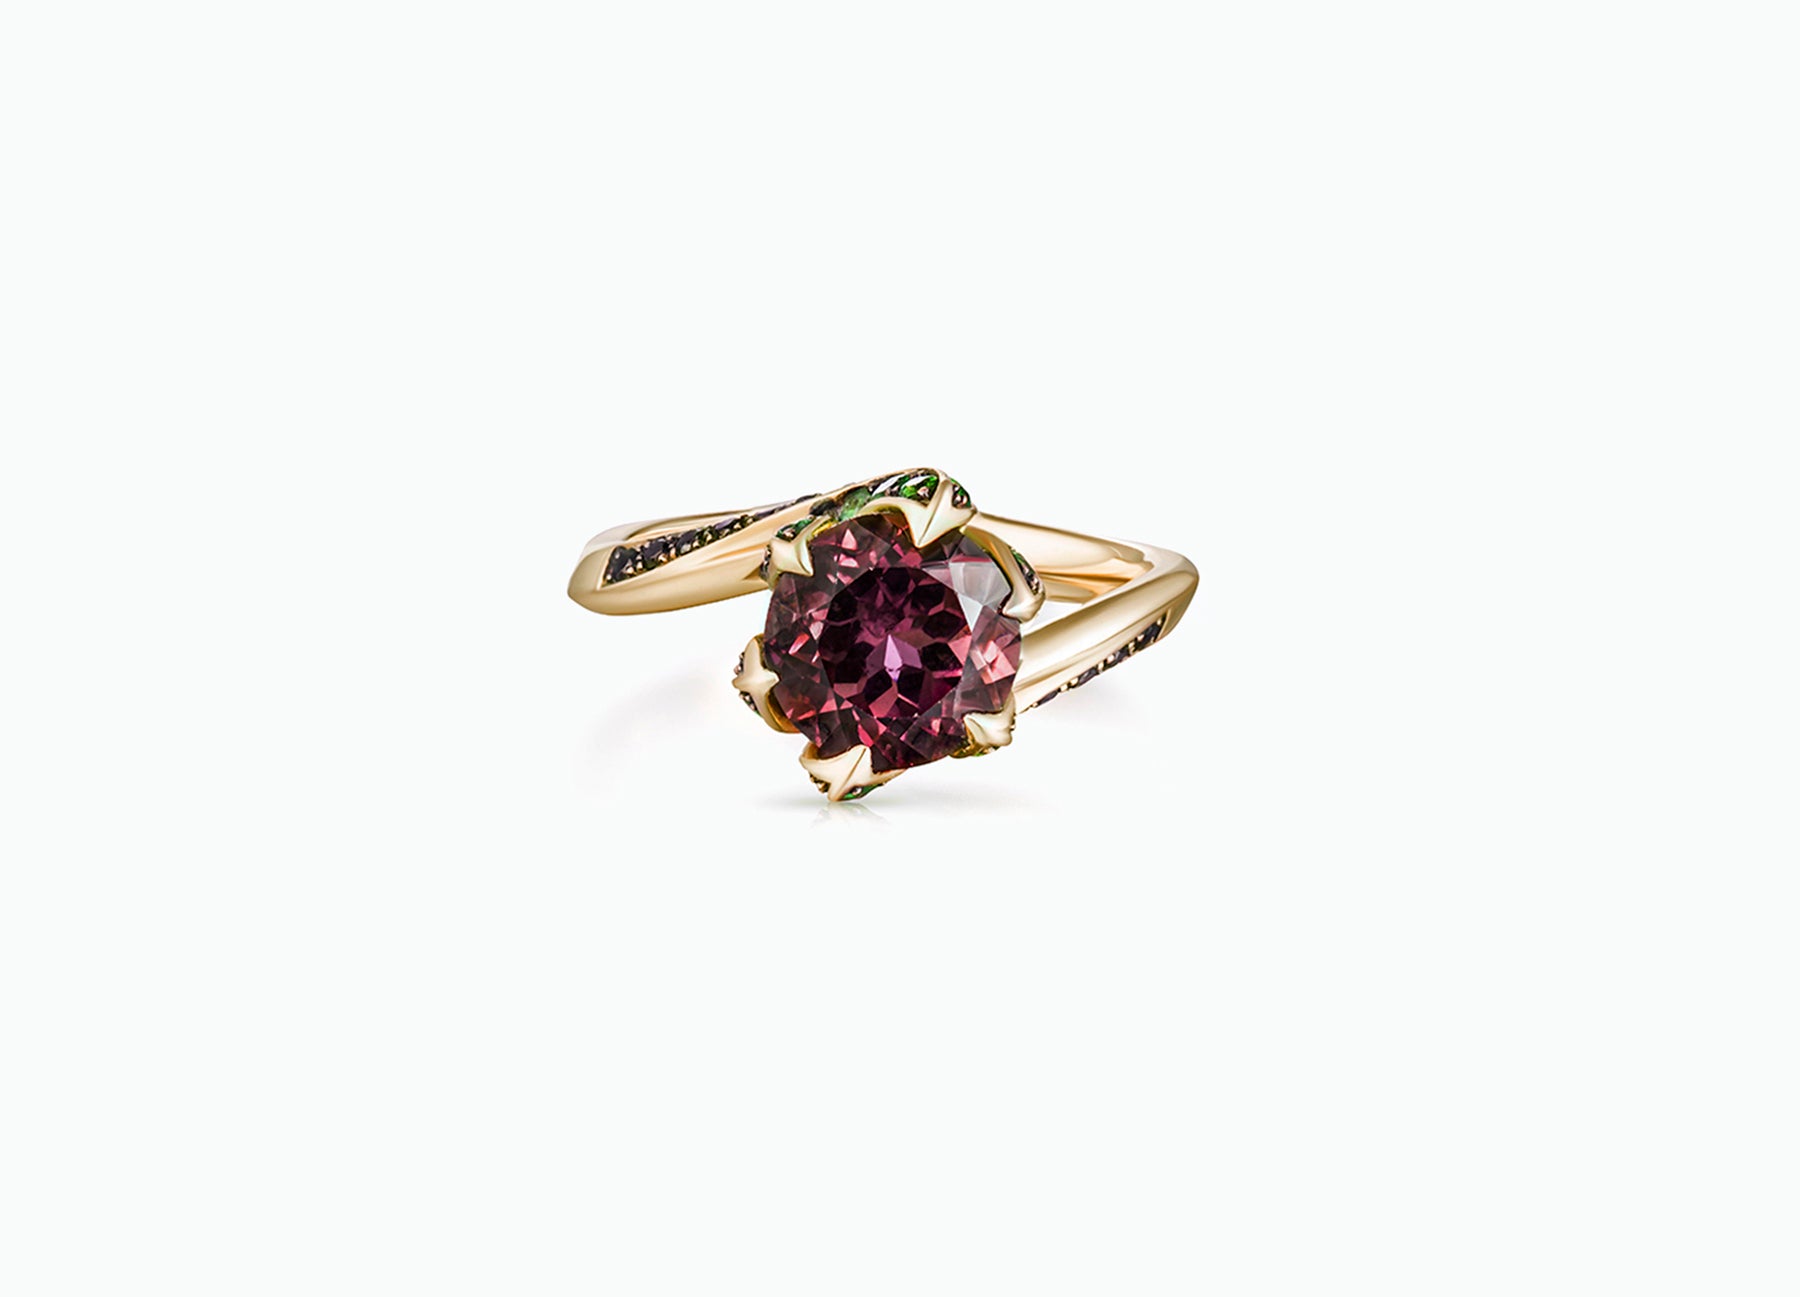 Lily Pad engagement ring in 18K yellow gold set with a rubellite tourmaline centre stone front view